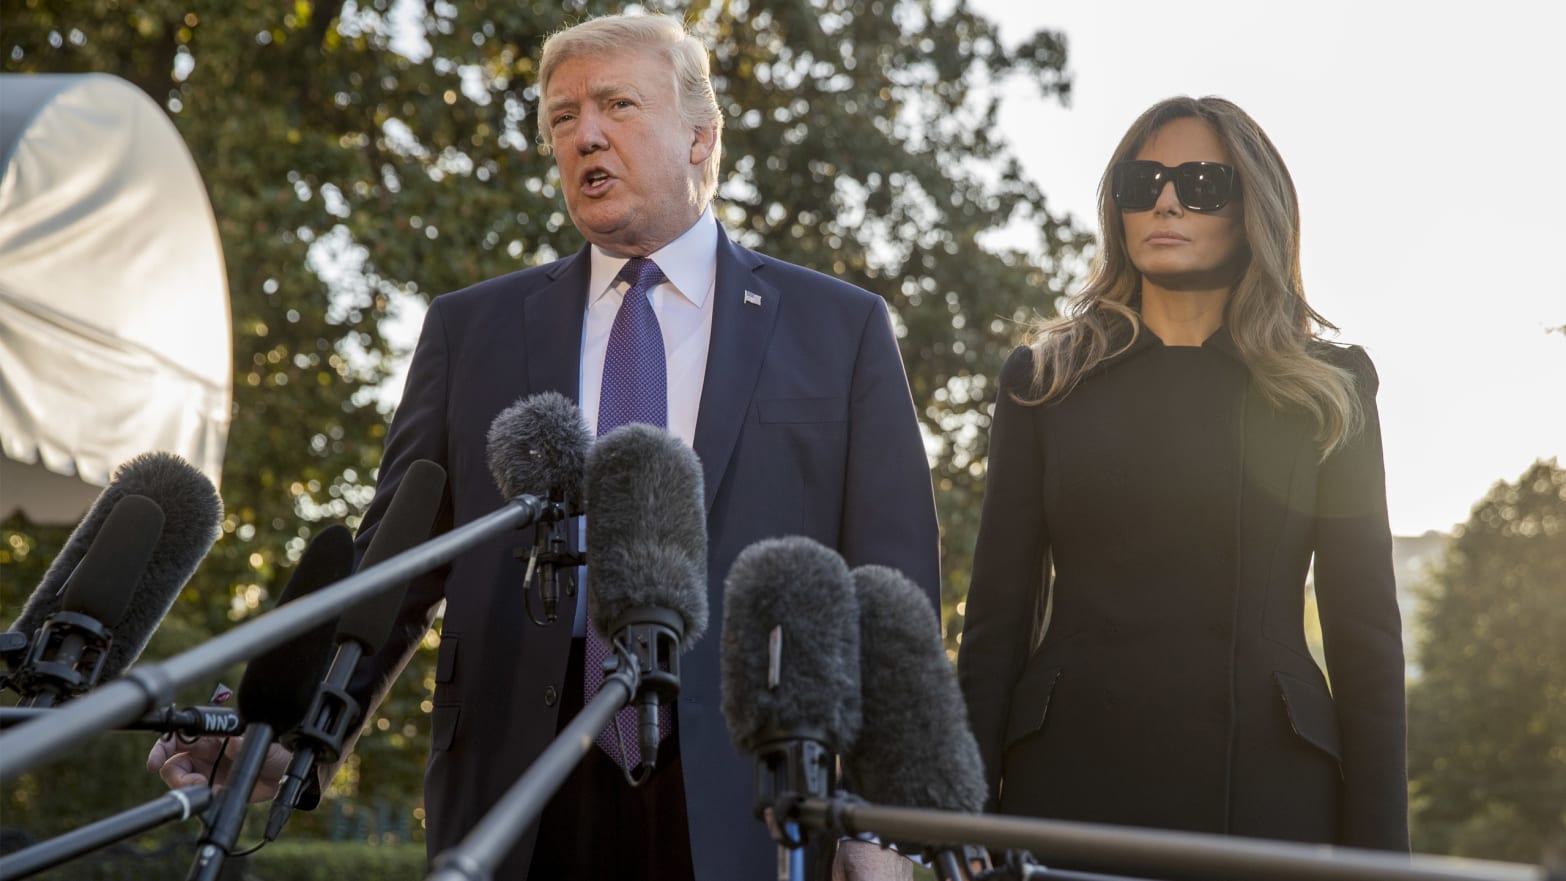 President Donald Trump, accompanied by first lady Melania Trump, speaks to reporters before travelling to Las Vegas to visit with victims and first responders affected by the worst mass shooting in American history